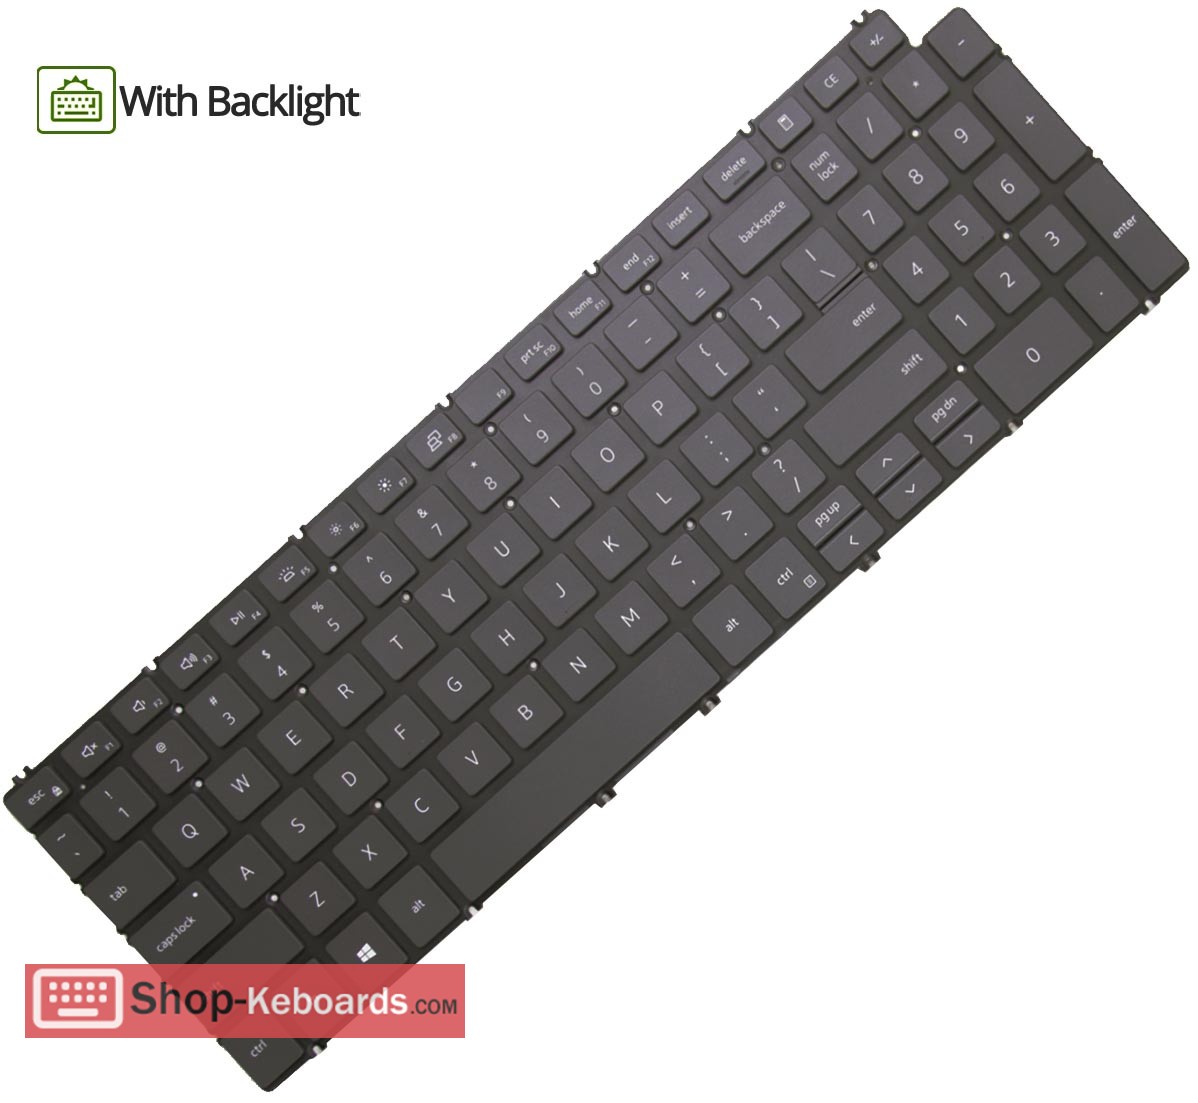 Dell G15 5515 RYZEN EDITION Keyboard replacement